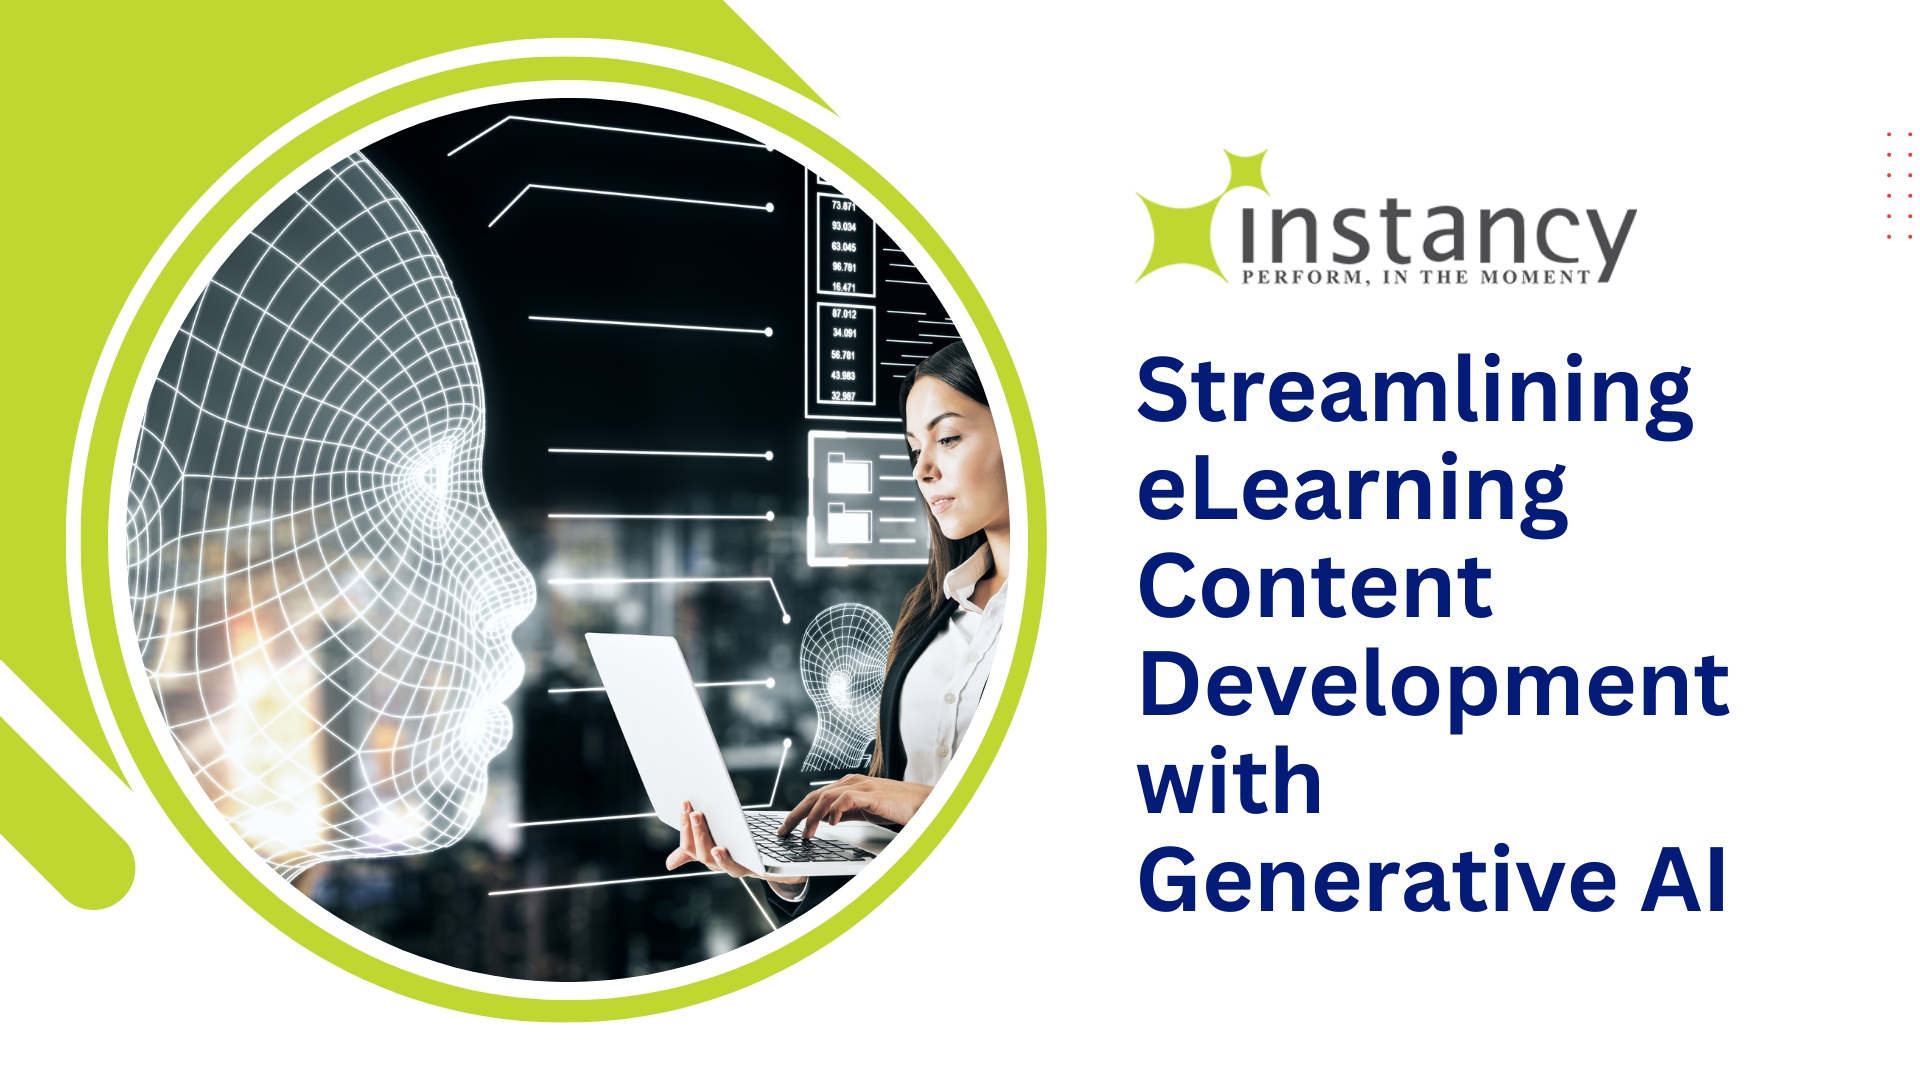 Streamlining eLearning Content Development with Generative AI